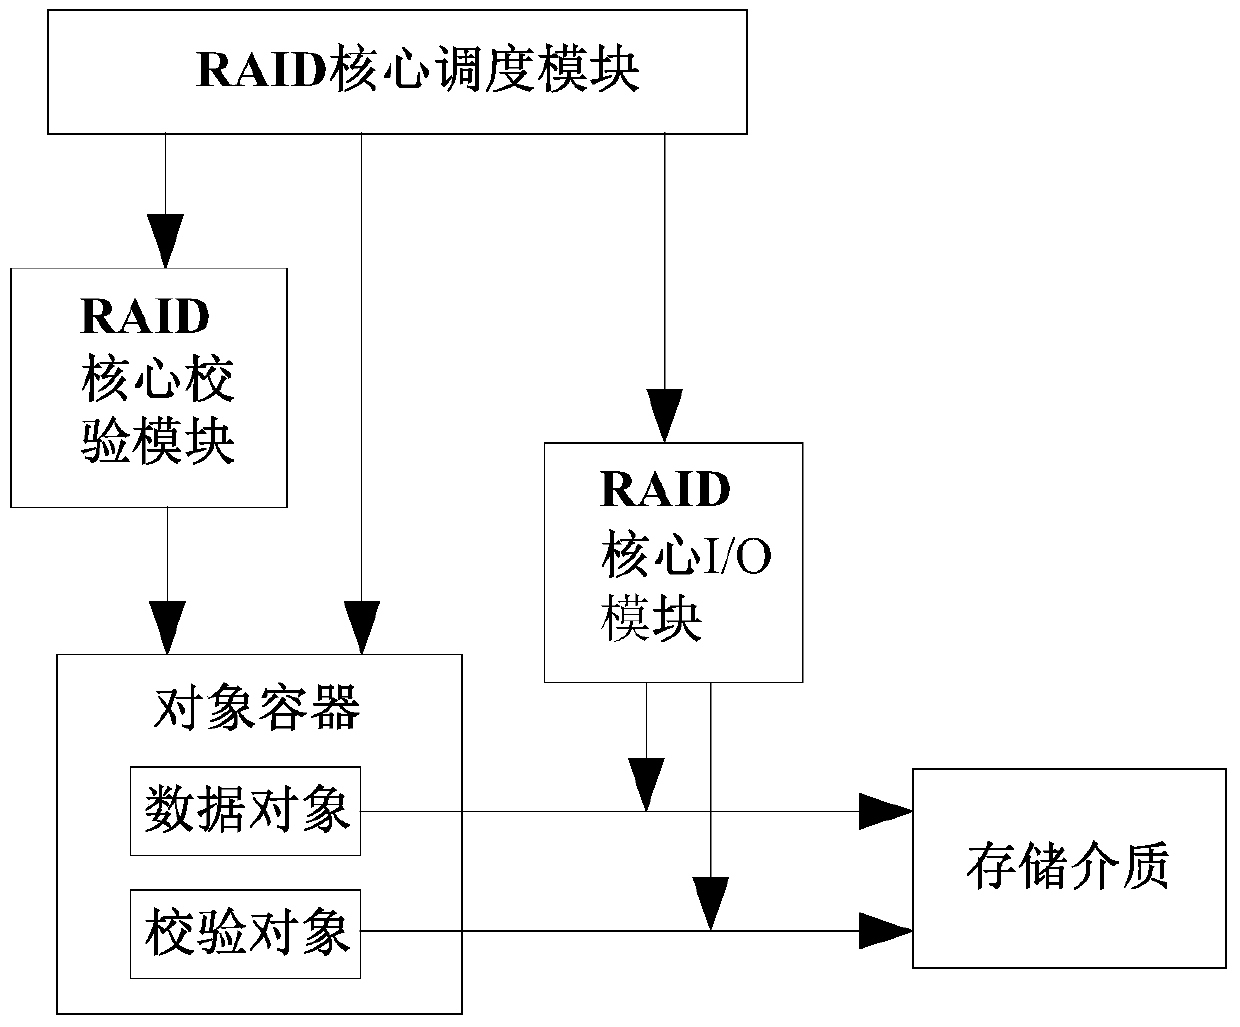 RAID, data reading and writing and its rebuilding method